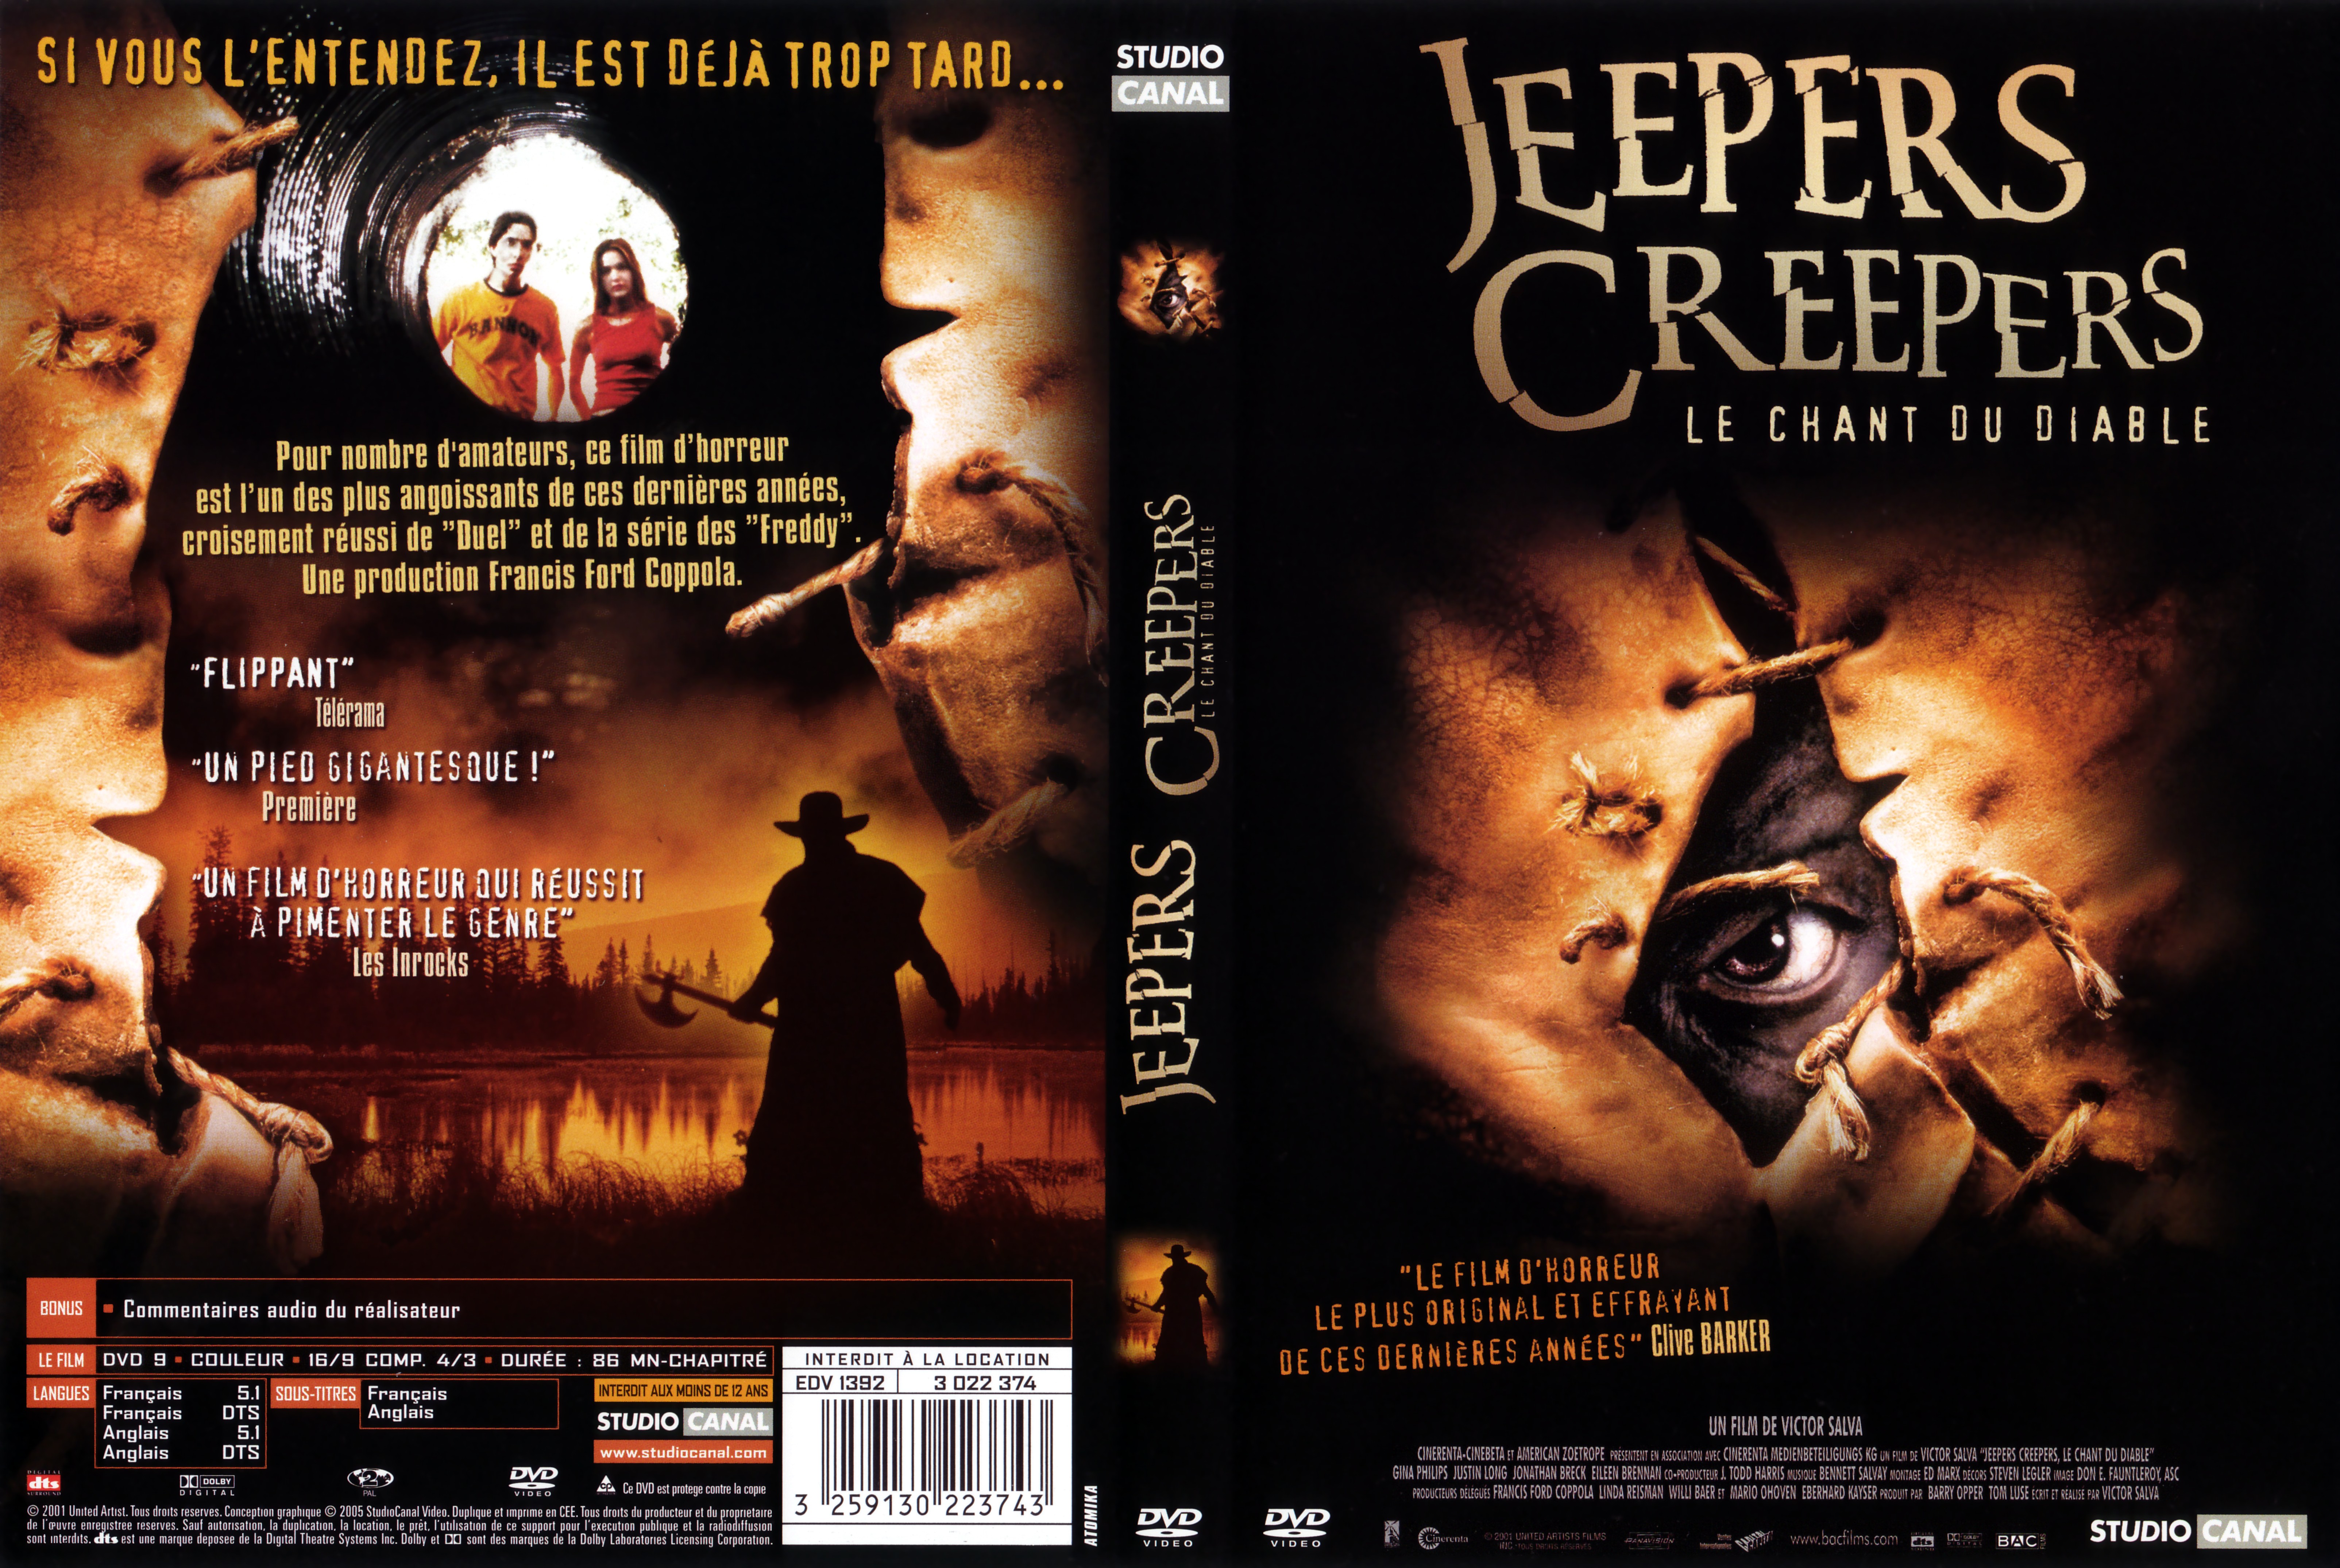 Jaquette DVD Jeepers creepers v3